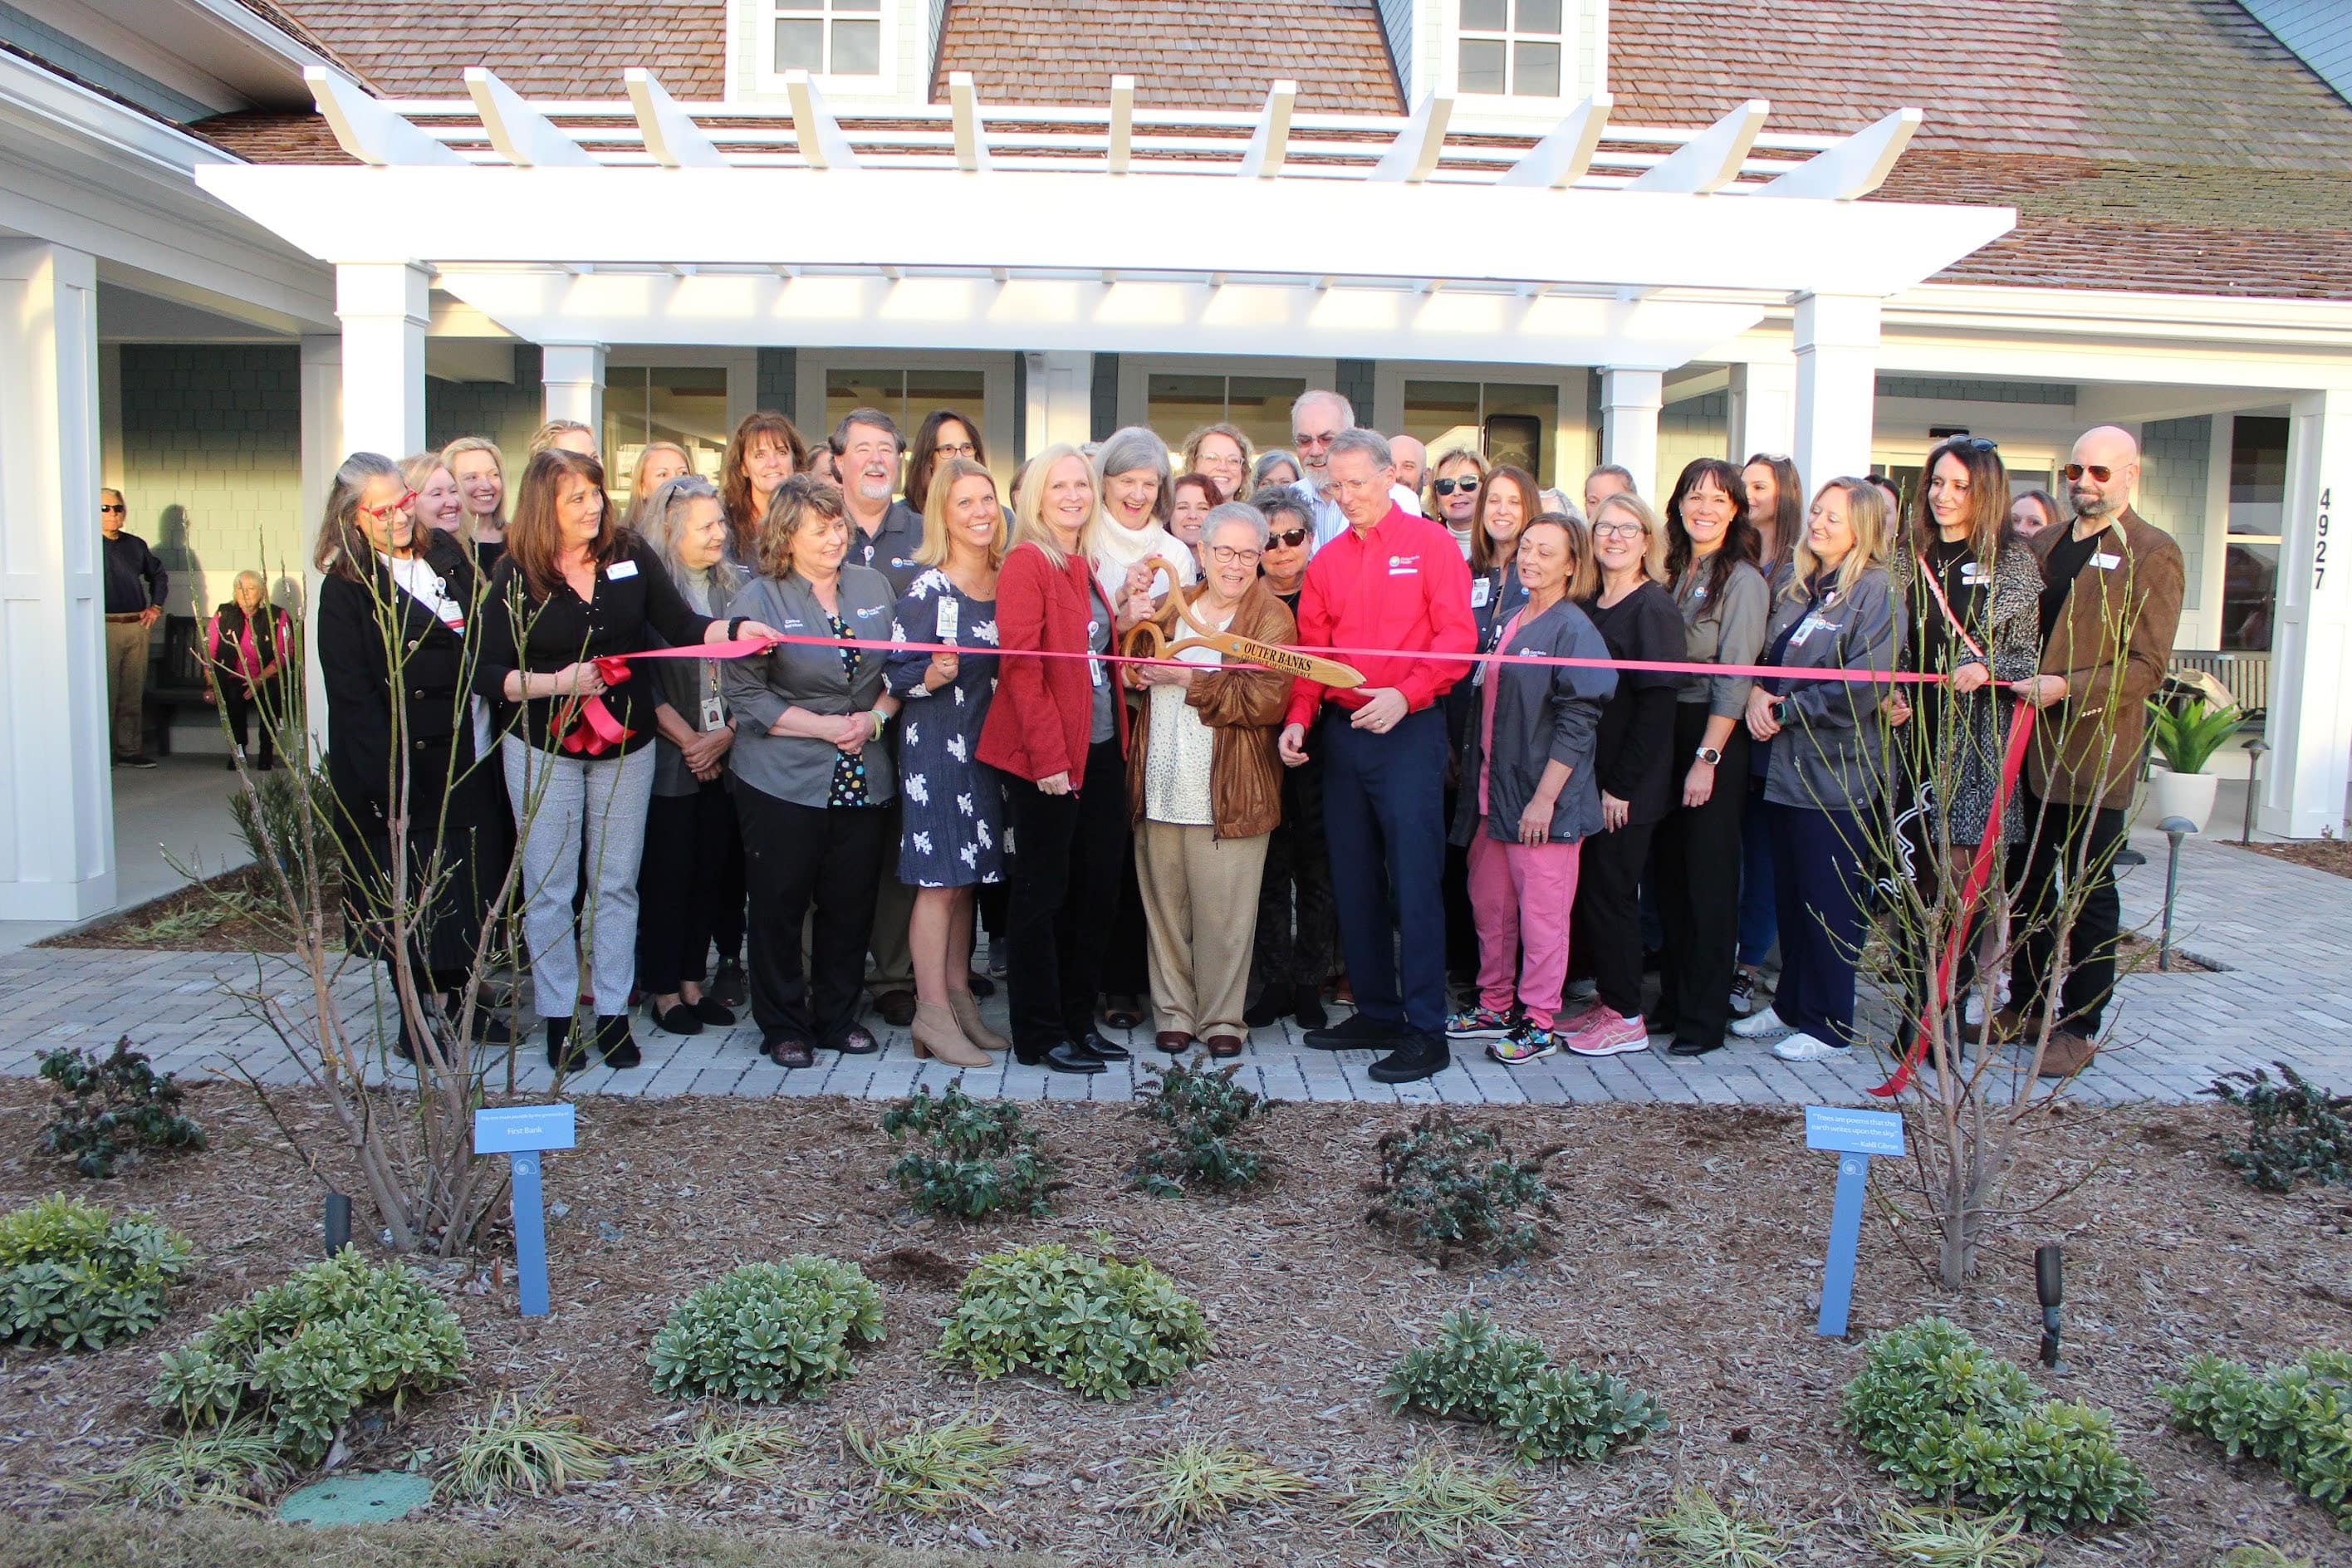 Members of Outer Banks Health leadership and Cancer Services team look on as lead donor Carol Cowell cuts the ribbon for the opening of the Outer Banks Health Carol S. and Edward D. Cowell, Jr. Cancer Center.